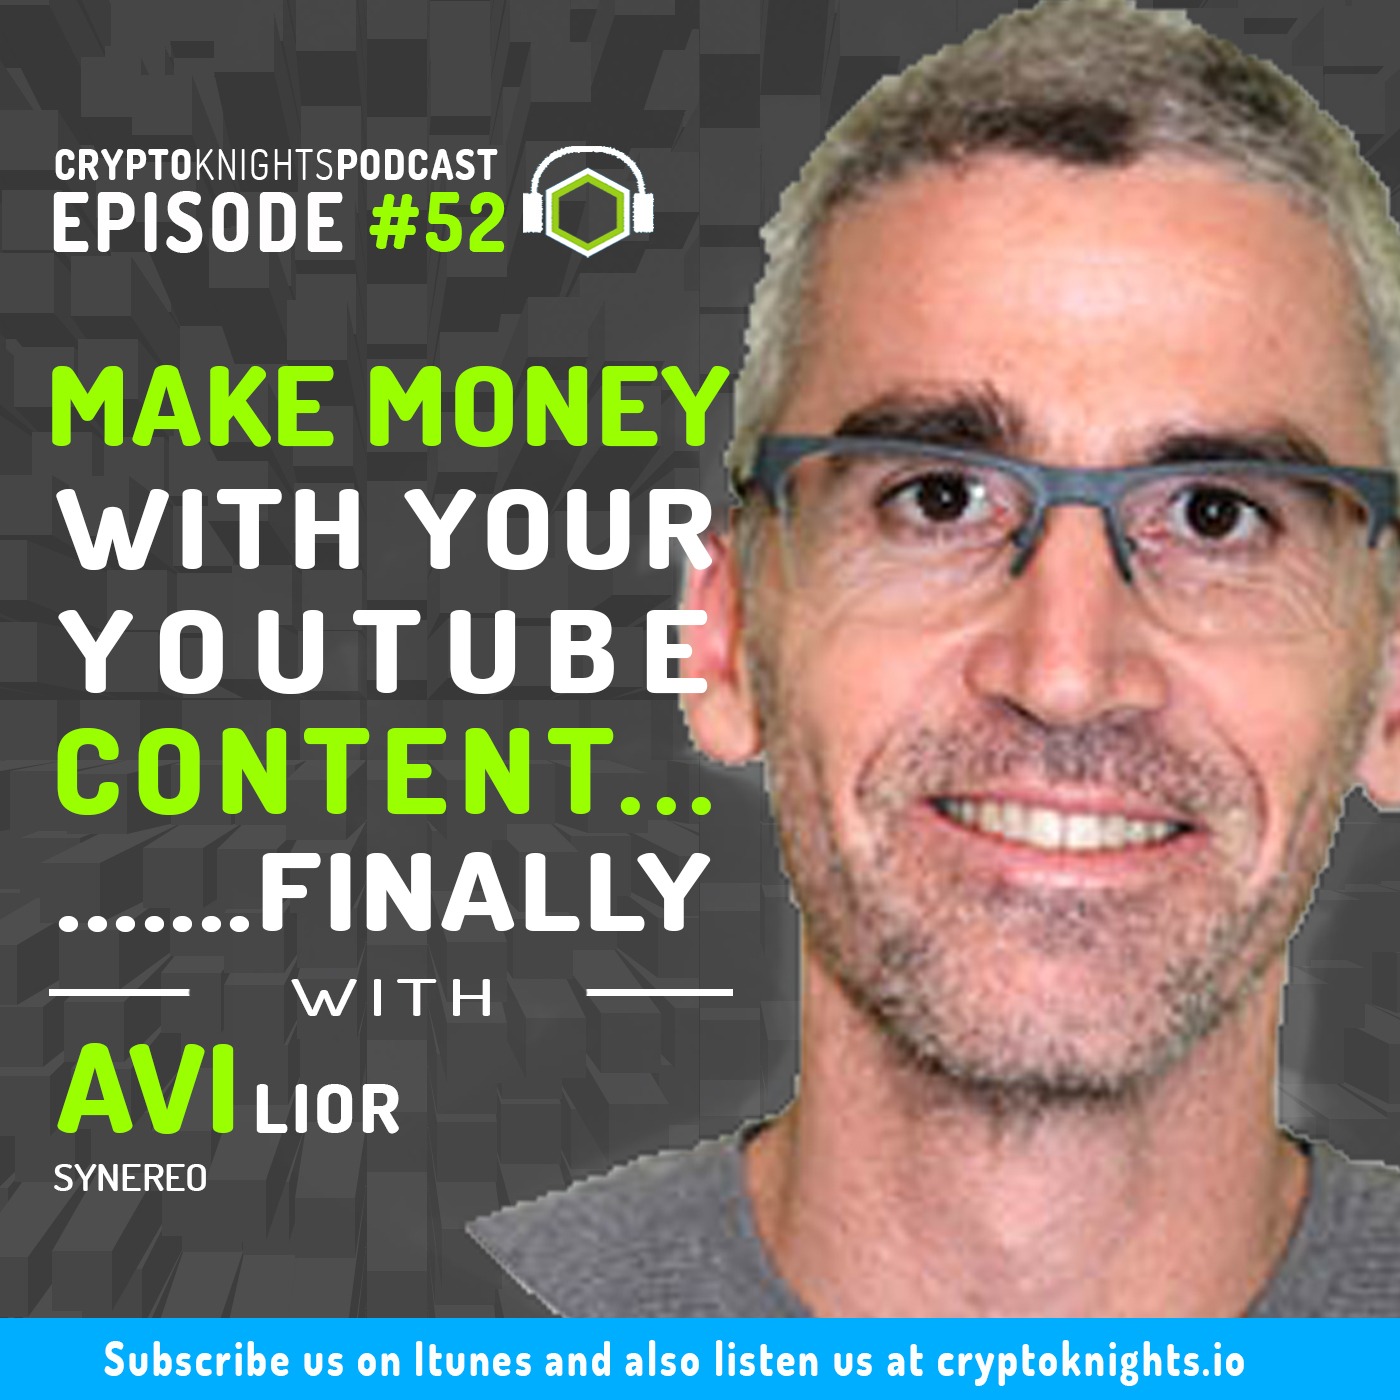 Episode 52: Make Money With Your YouTube Content...Finally!